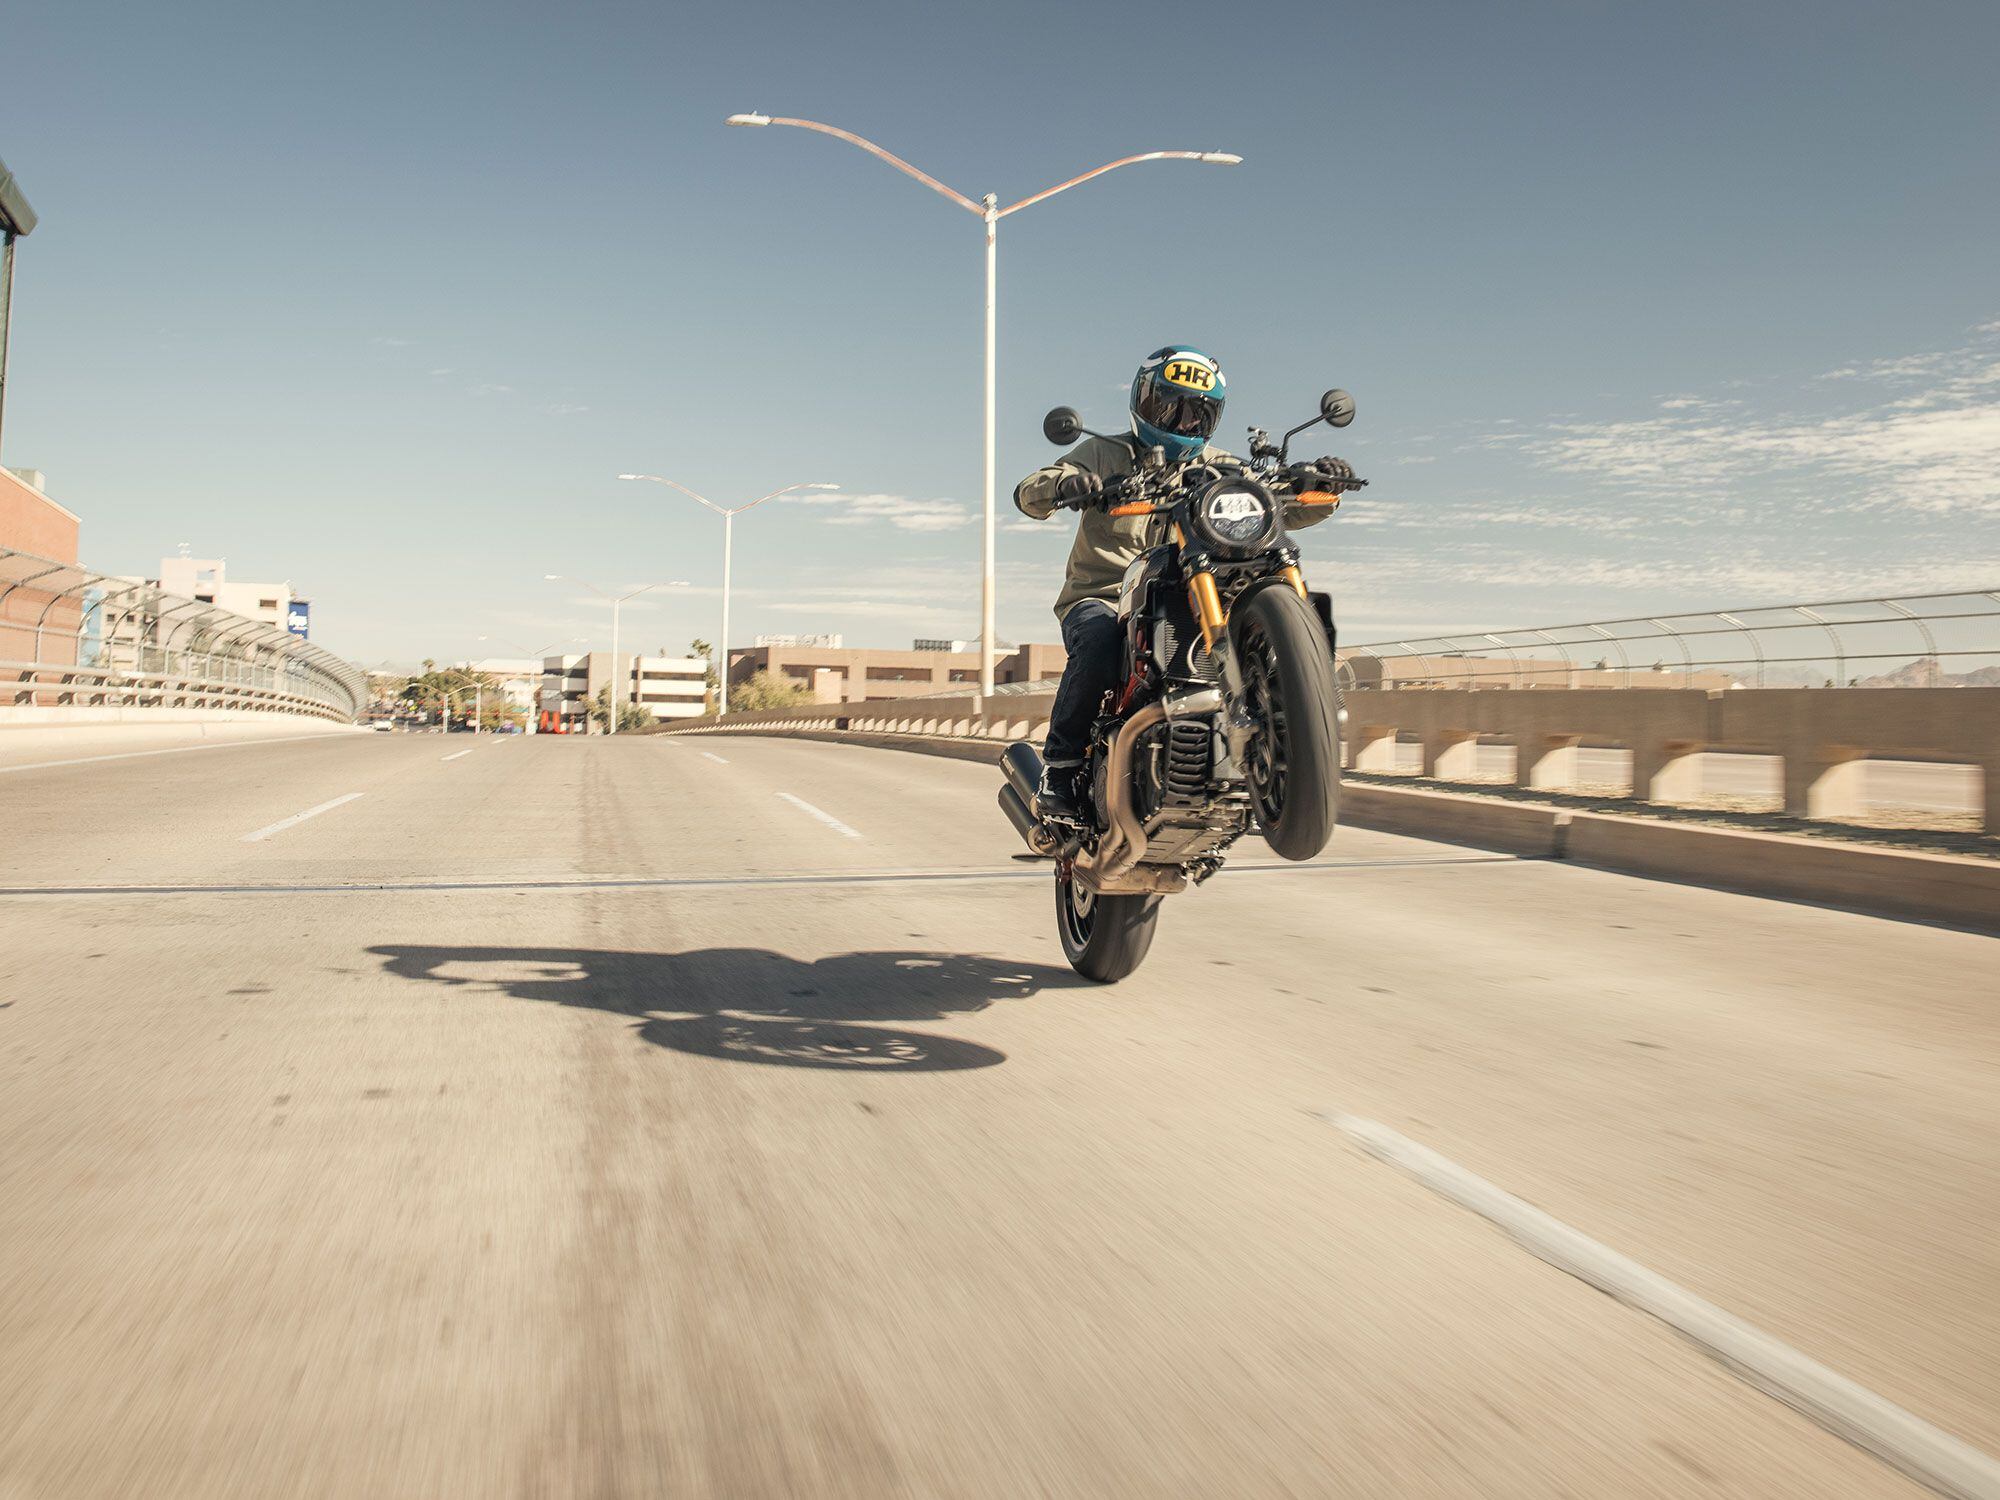 The FTR 1200’s rowdy personality has changed, but hasn’t been entirely eliminated. Wheelies galore!